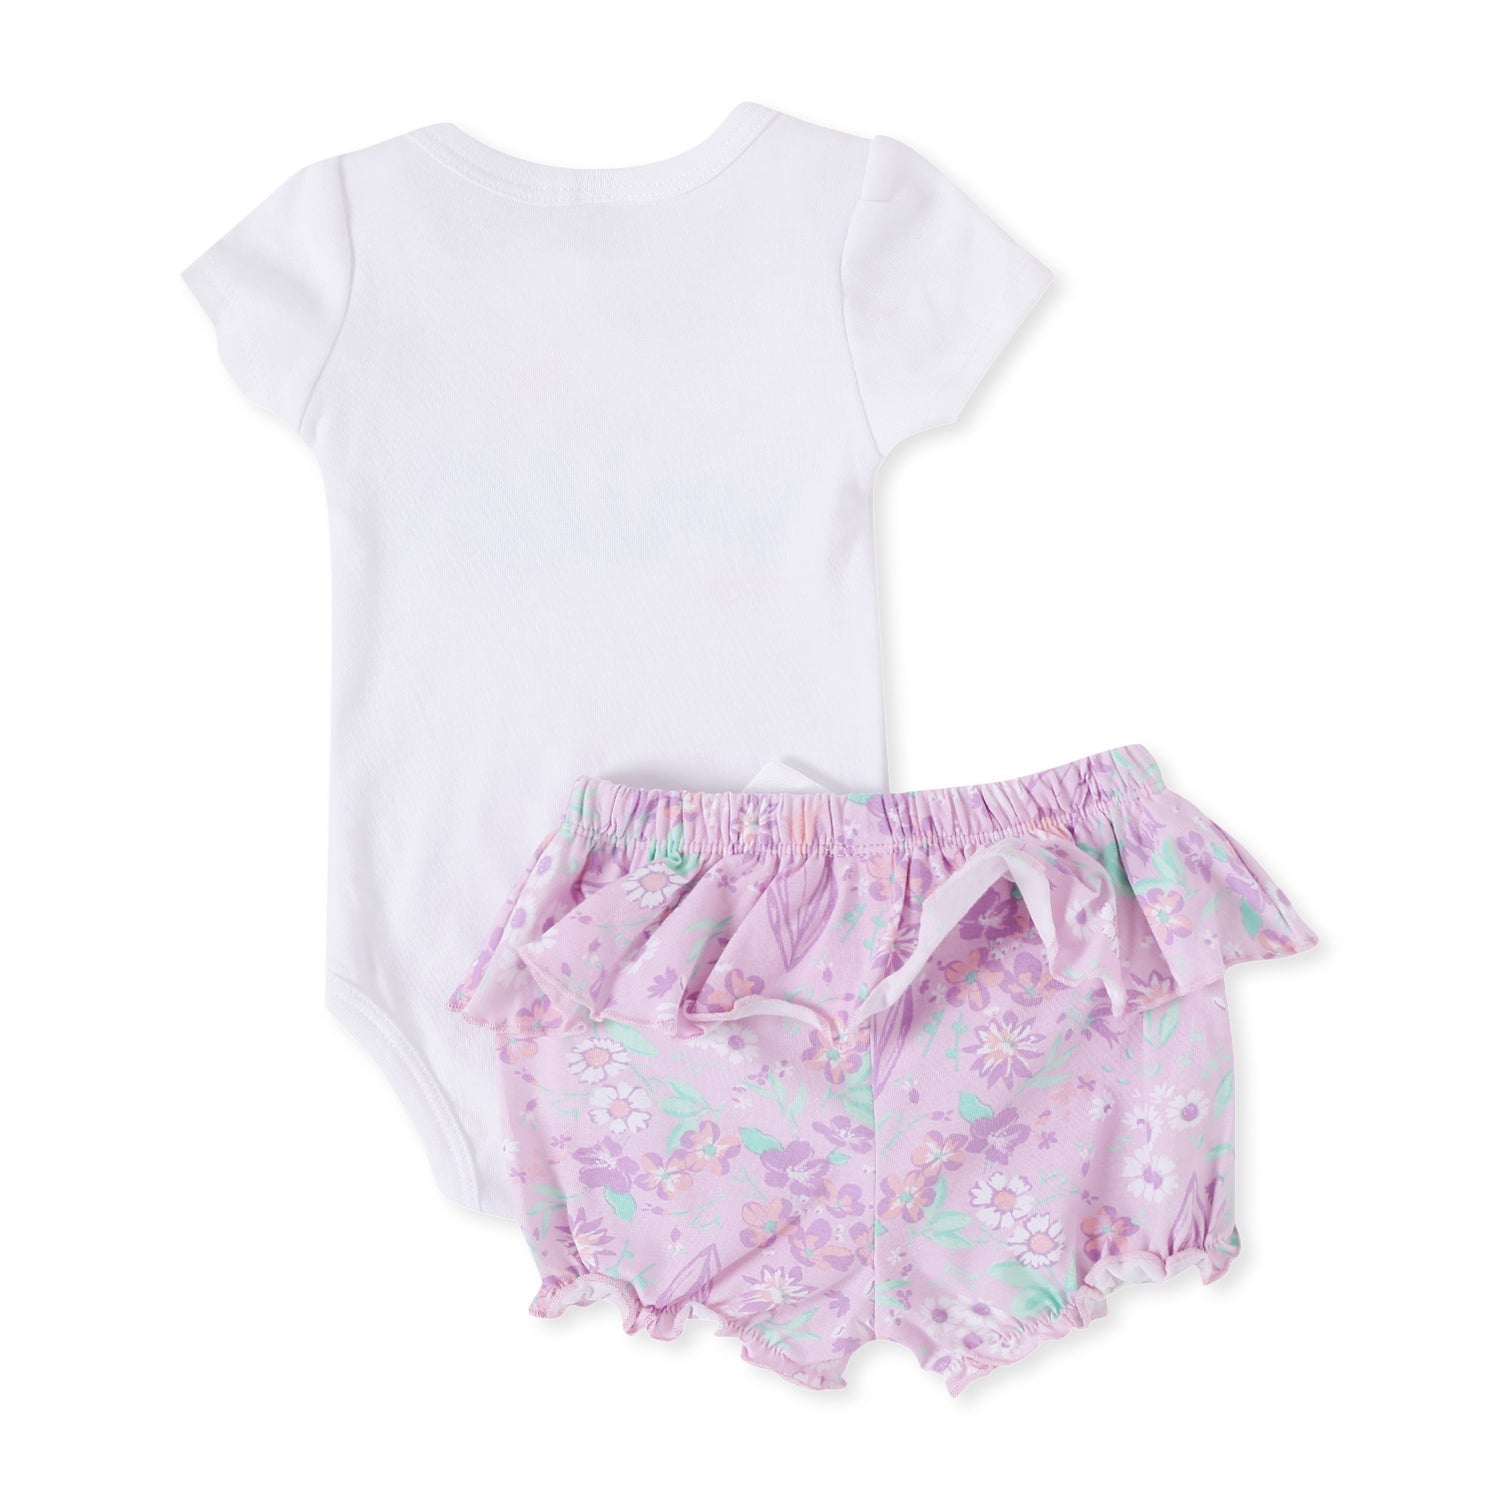 Giggles & Wiggles You Make Me Smile White Onesies With Shorts For 0-3M